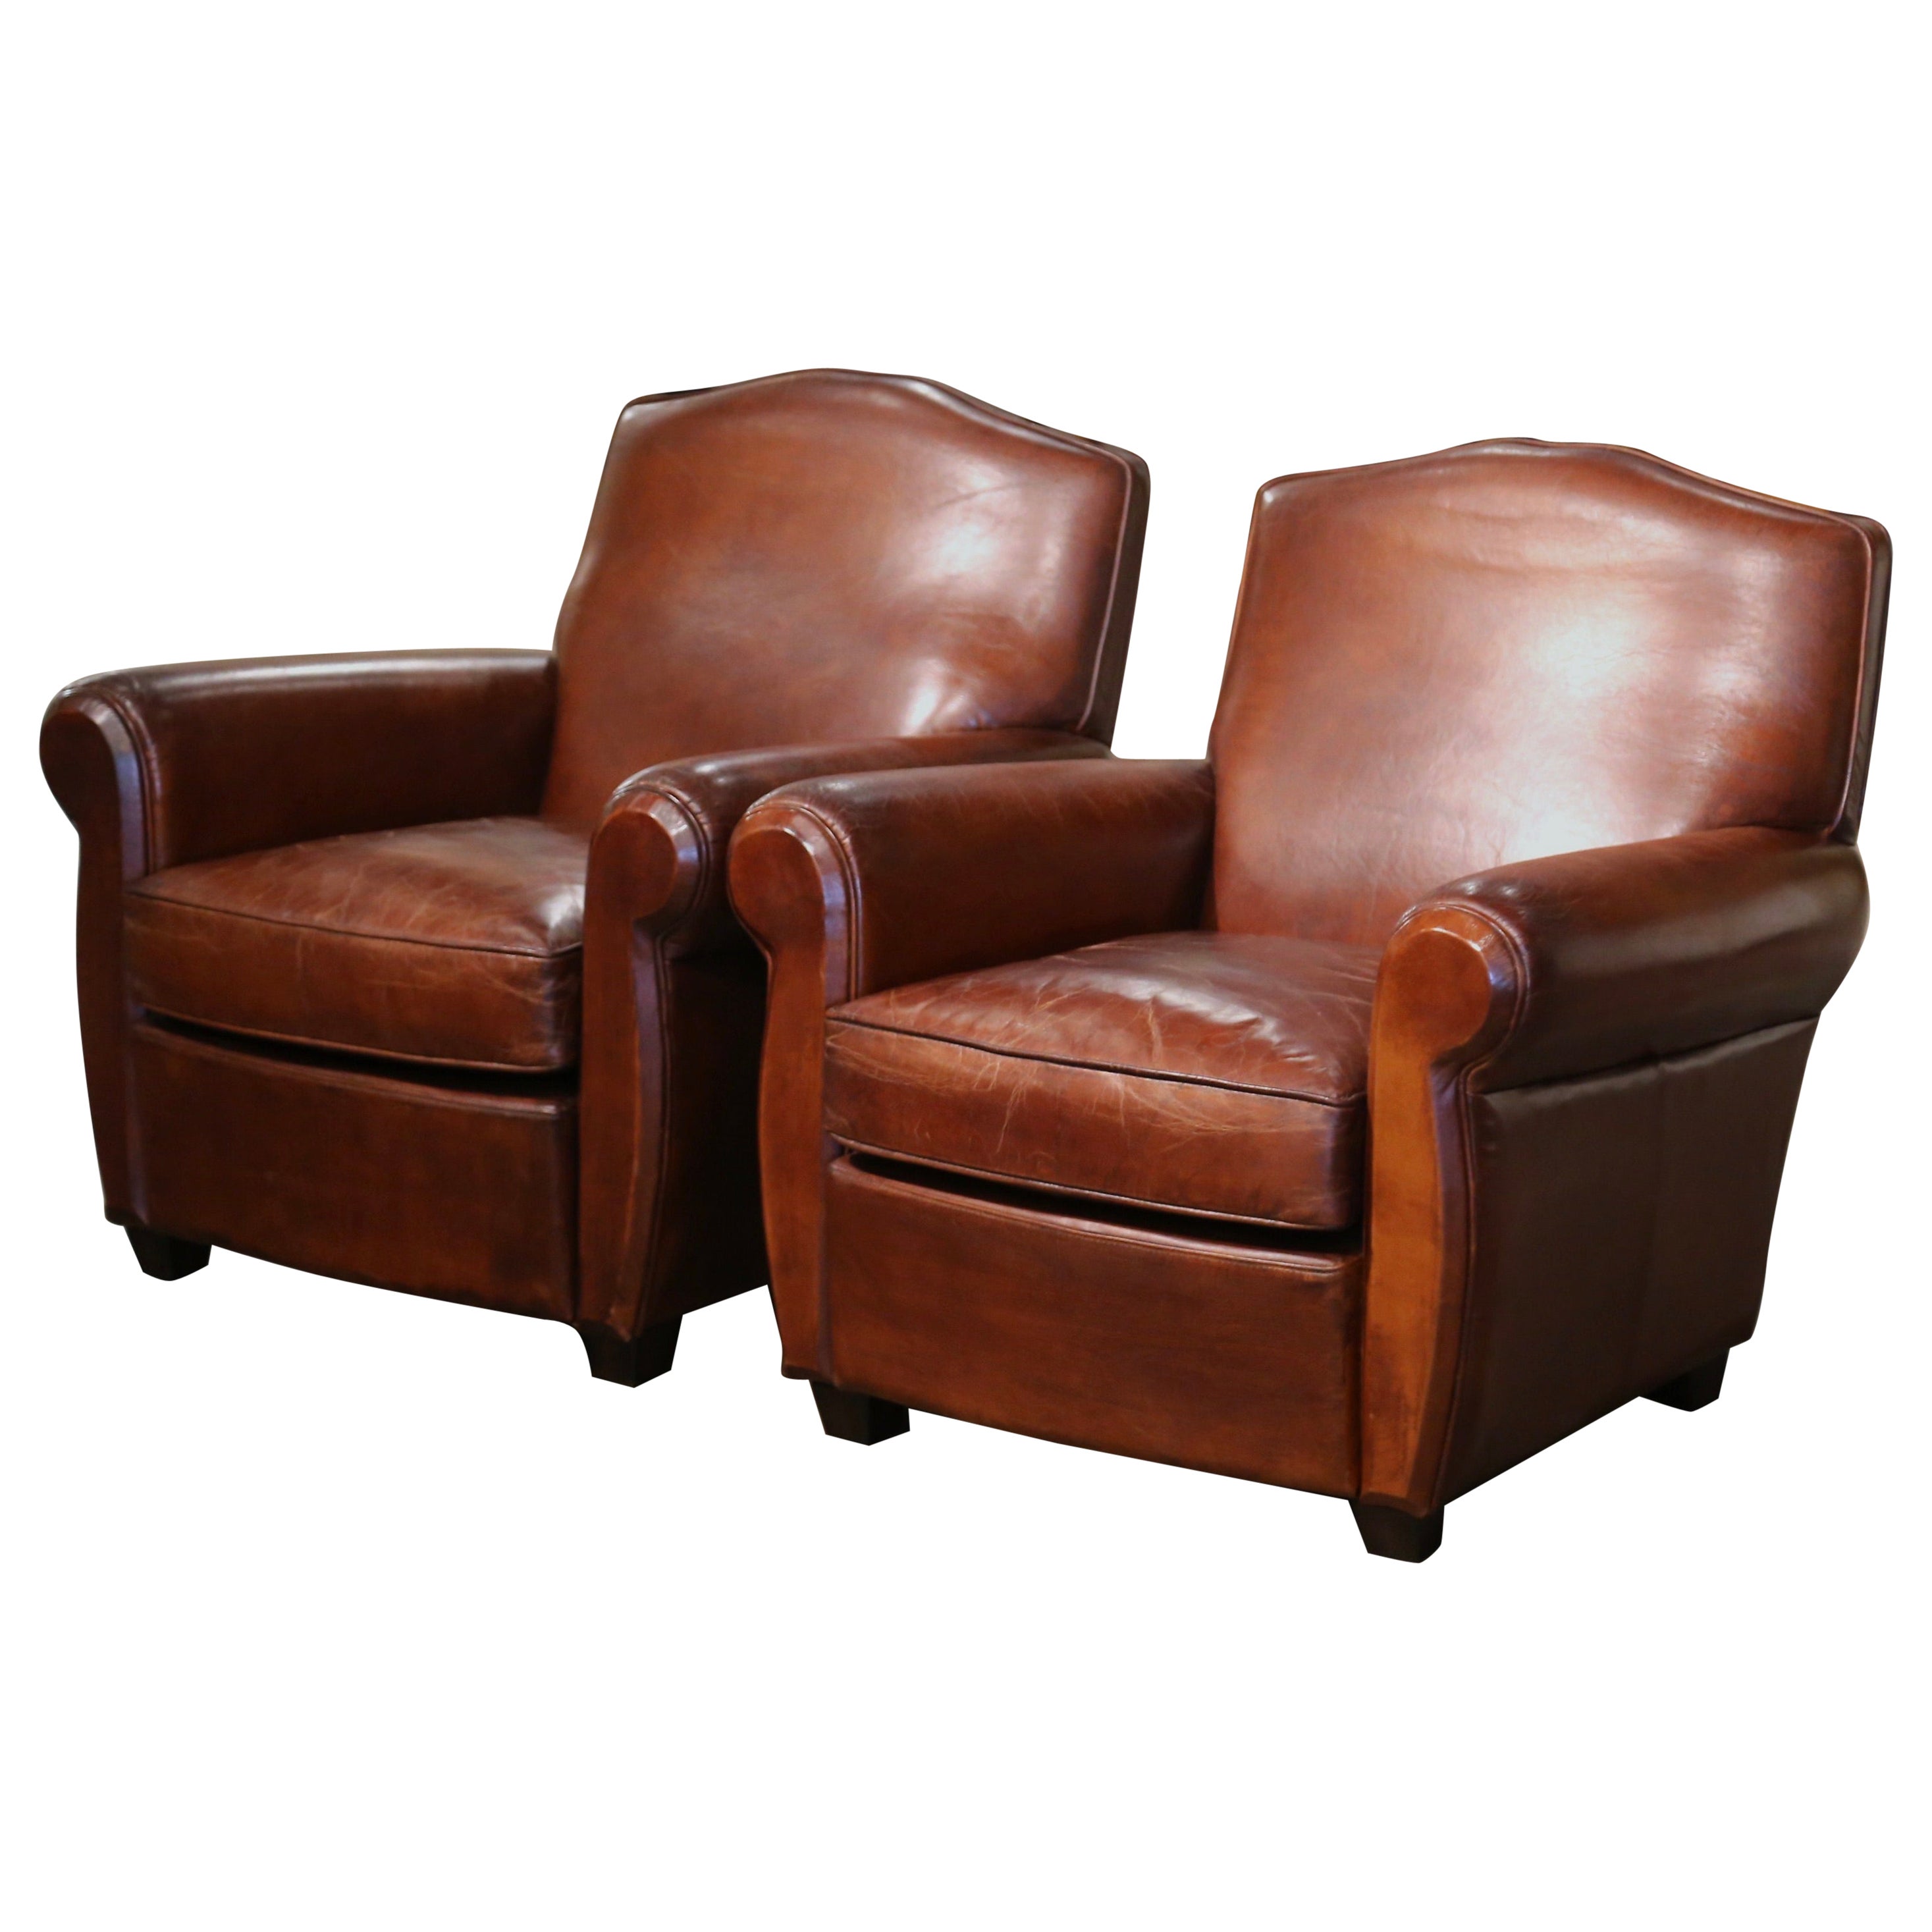 Pair of Early 20th Century French Art-Deco Brown Leather Club Armchairs